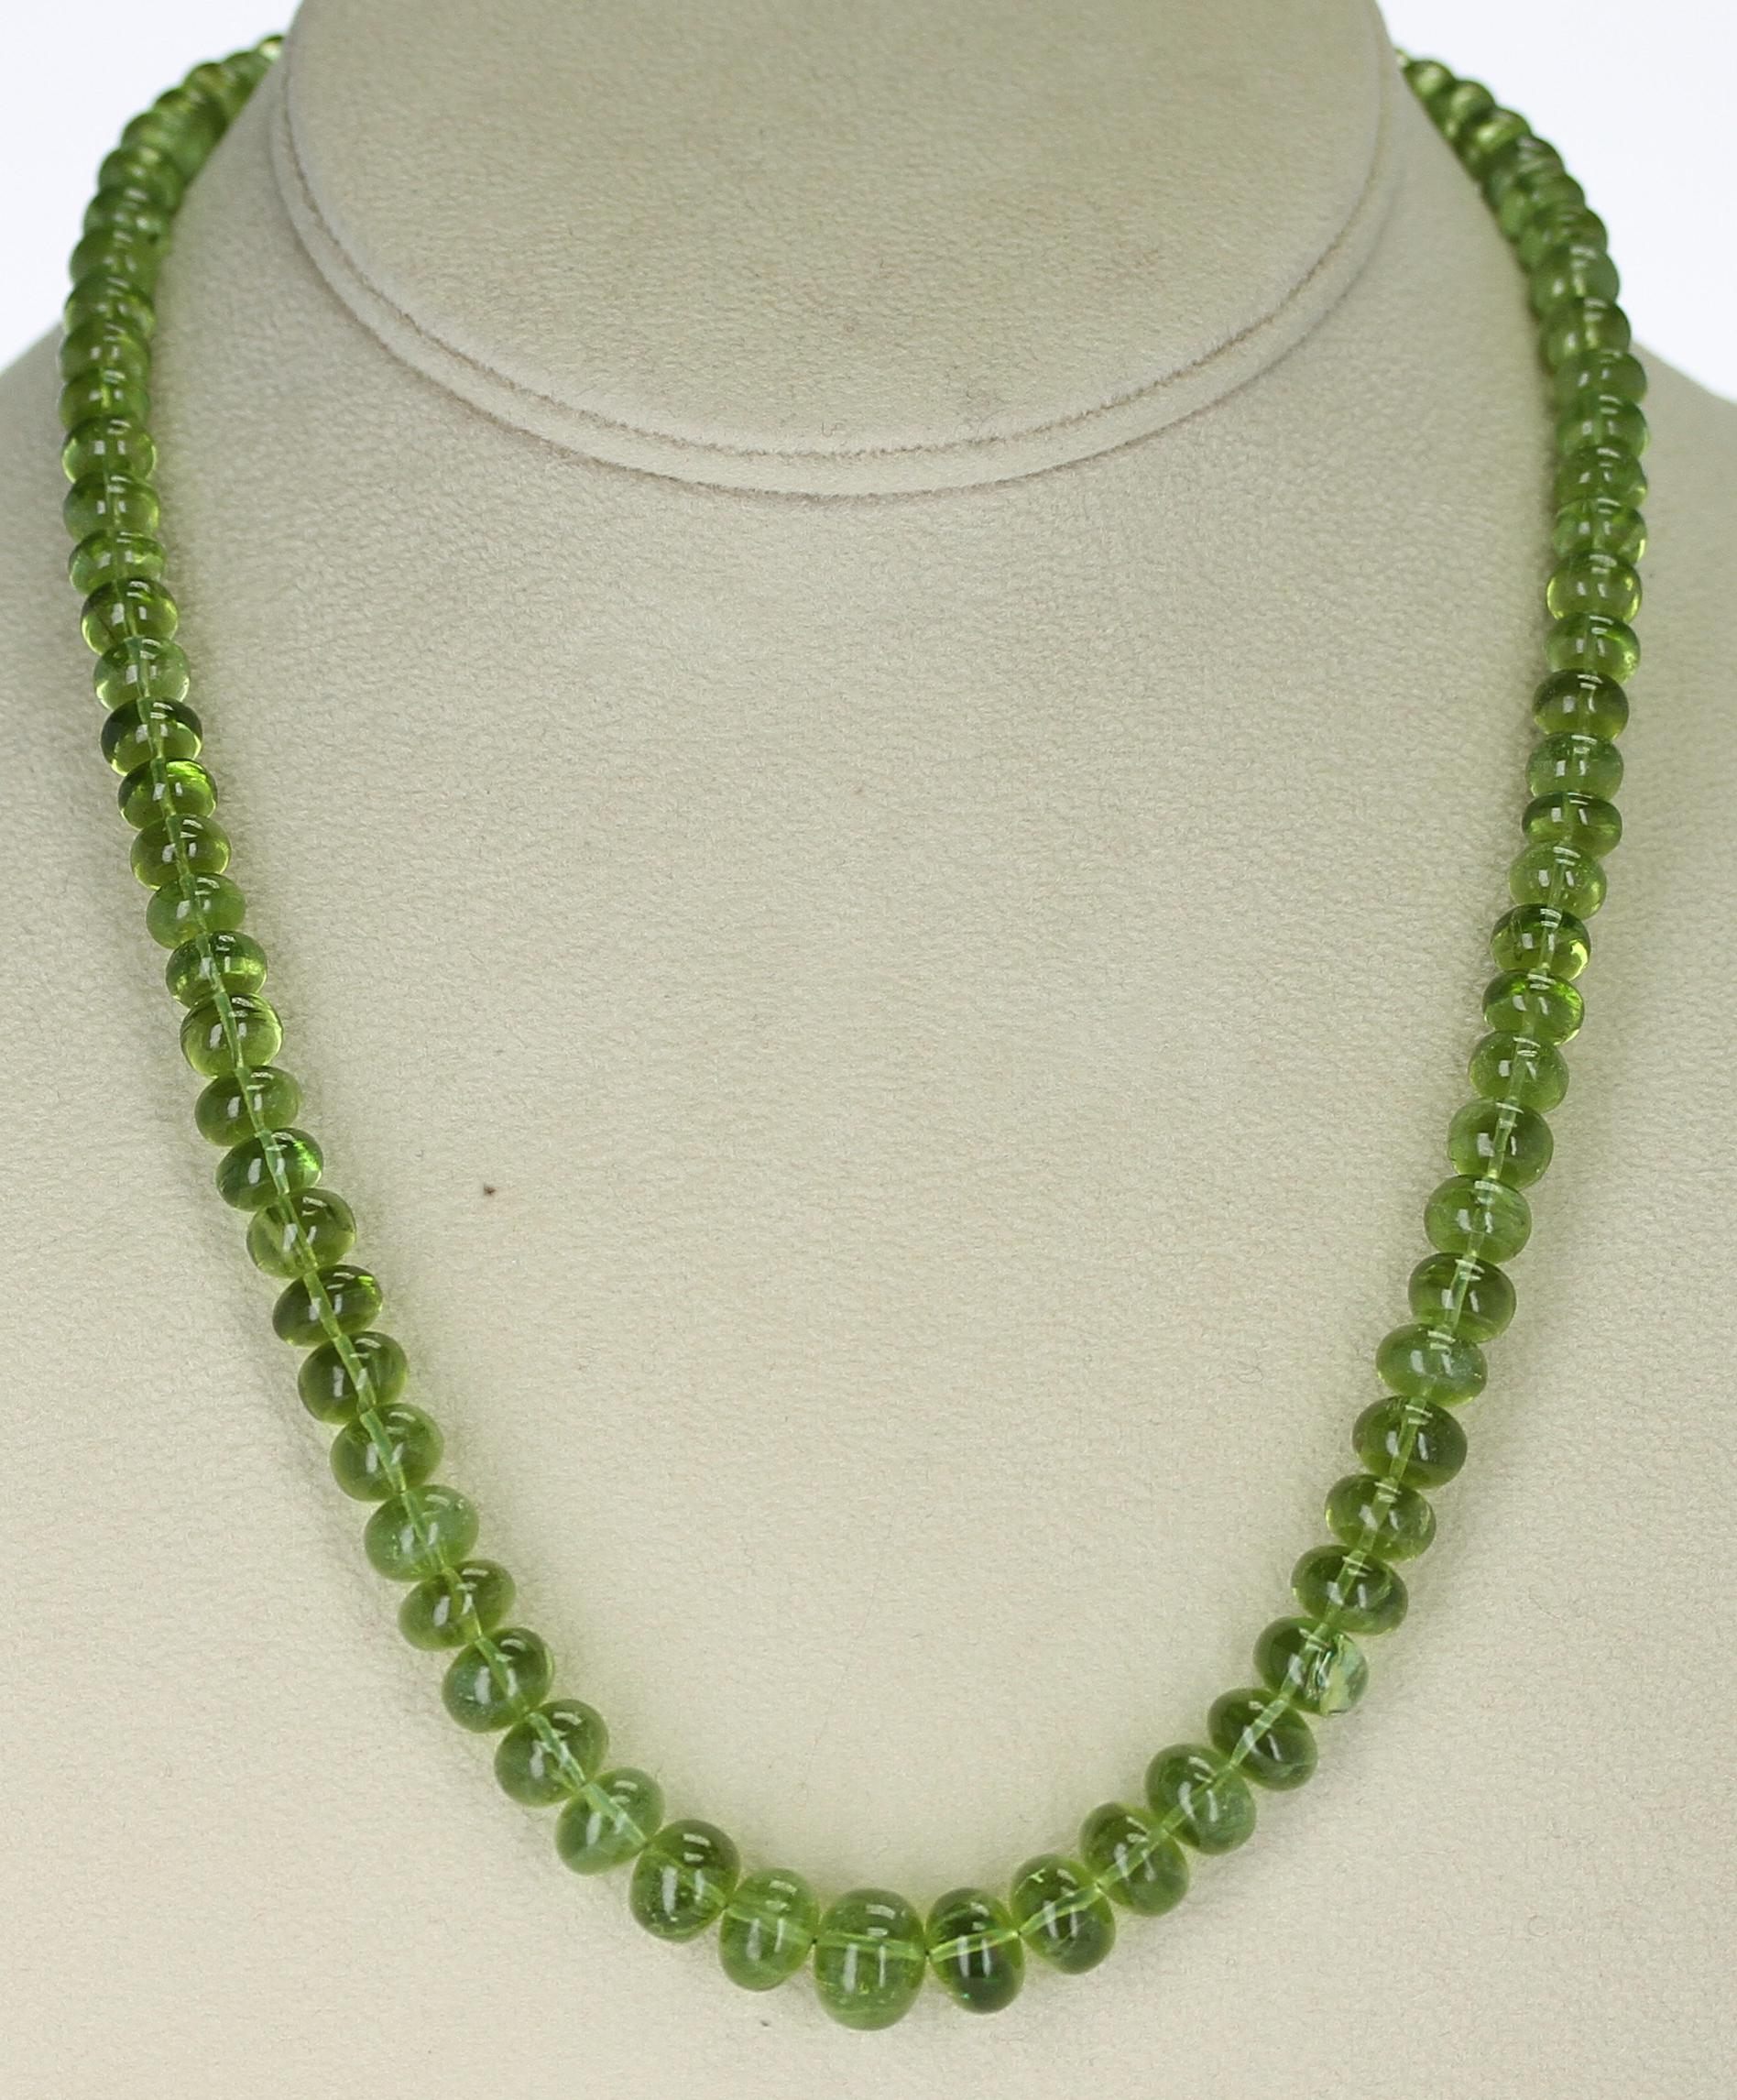 DG HAND MADE 277.50 CTS NATURAL 3 STRAND GREEN PERIDOT UNHEATED BEADS NECKLACE 